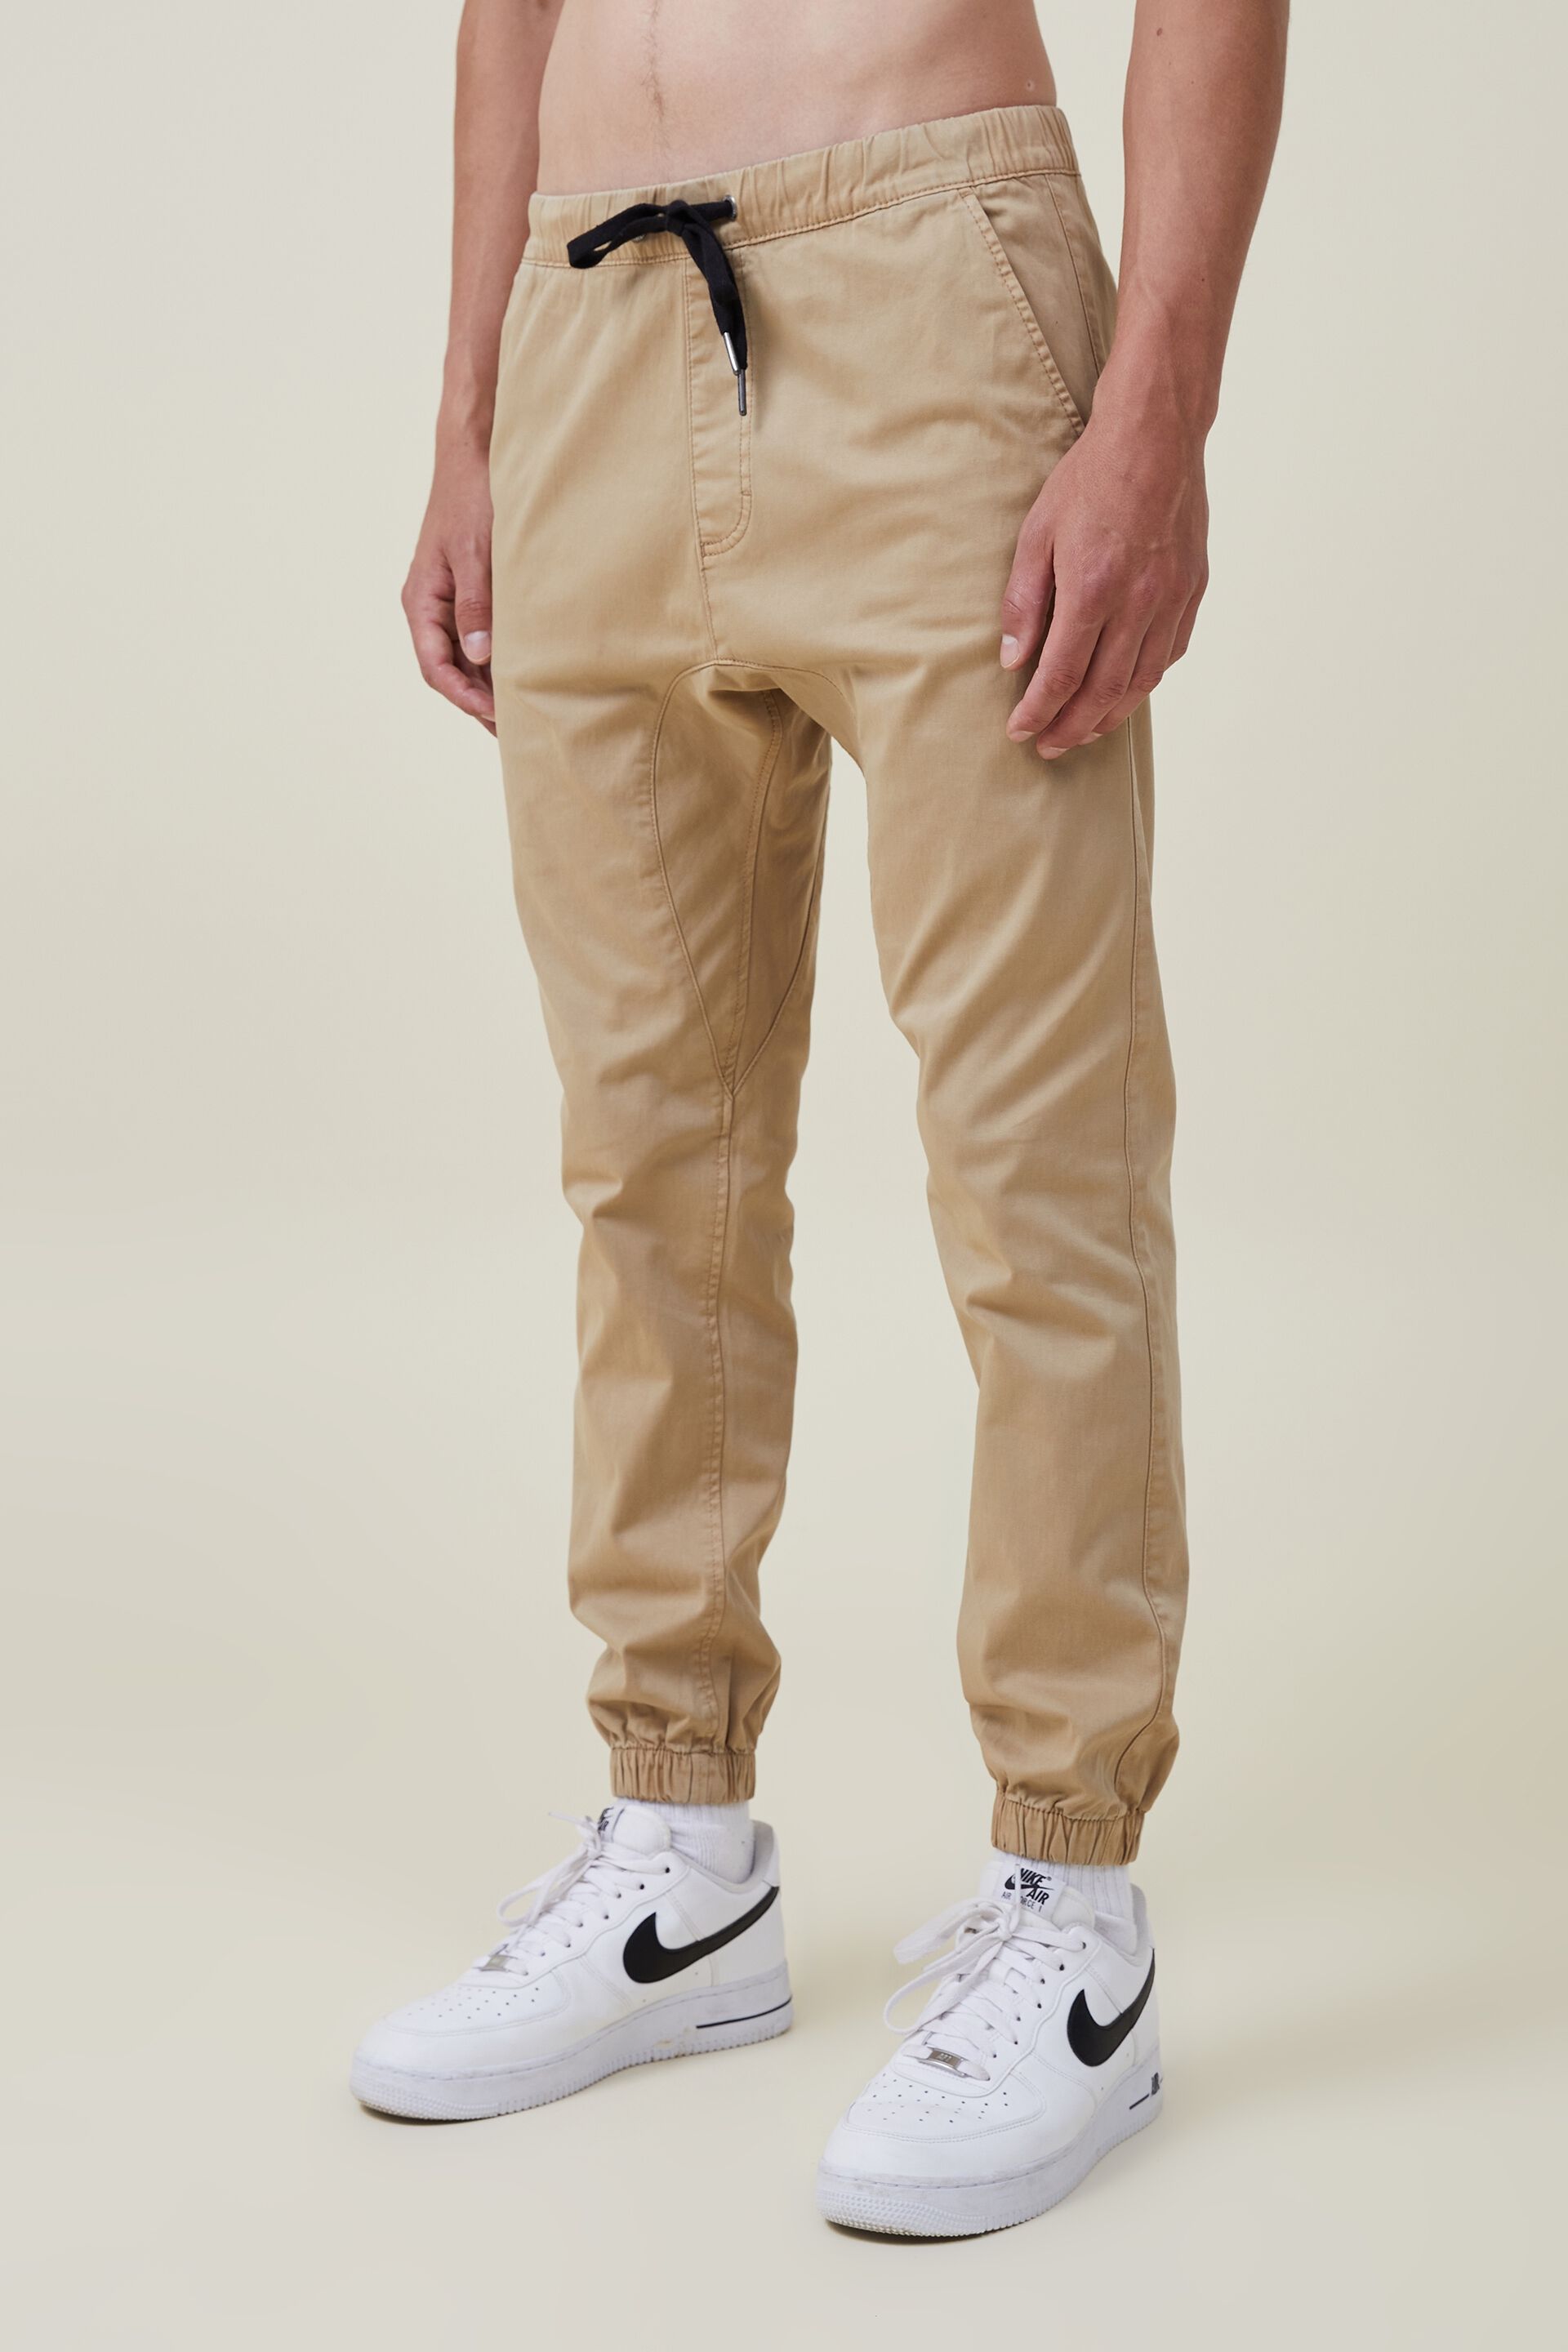 Men's custom-made chinos - starting at AUD 129 | Tailor Store®